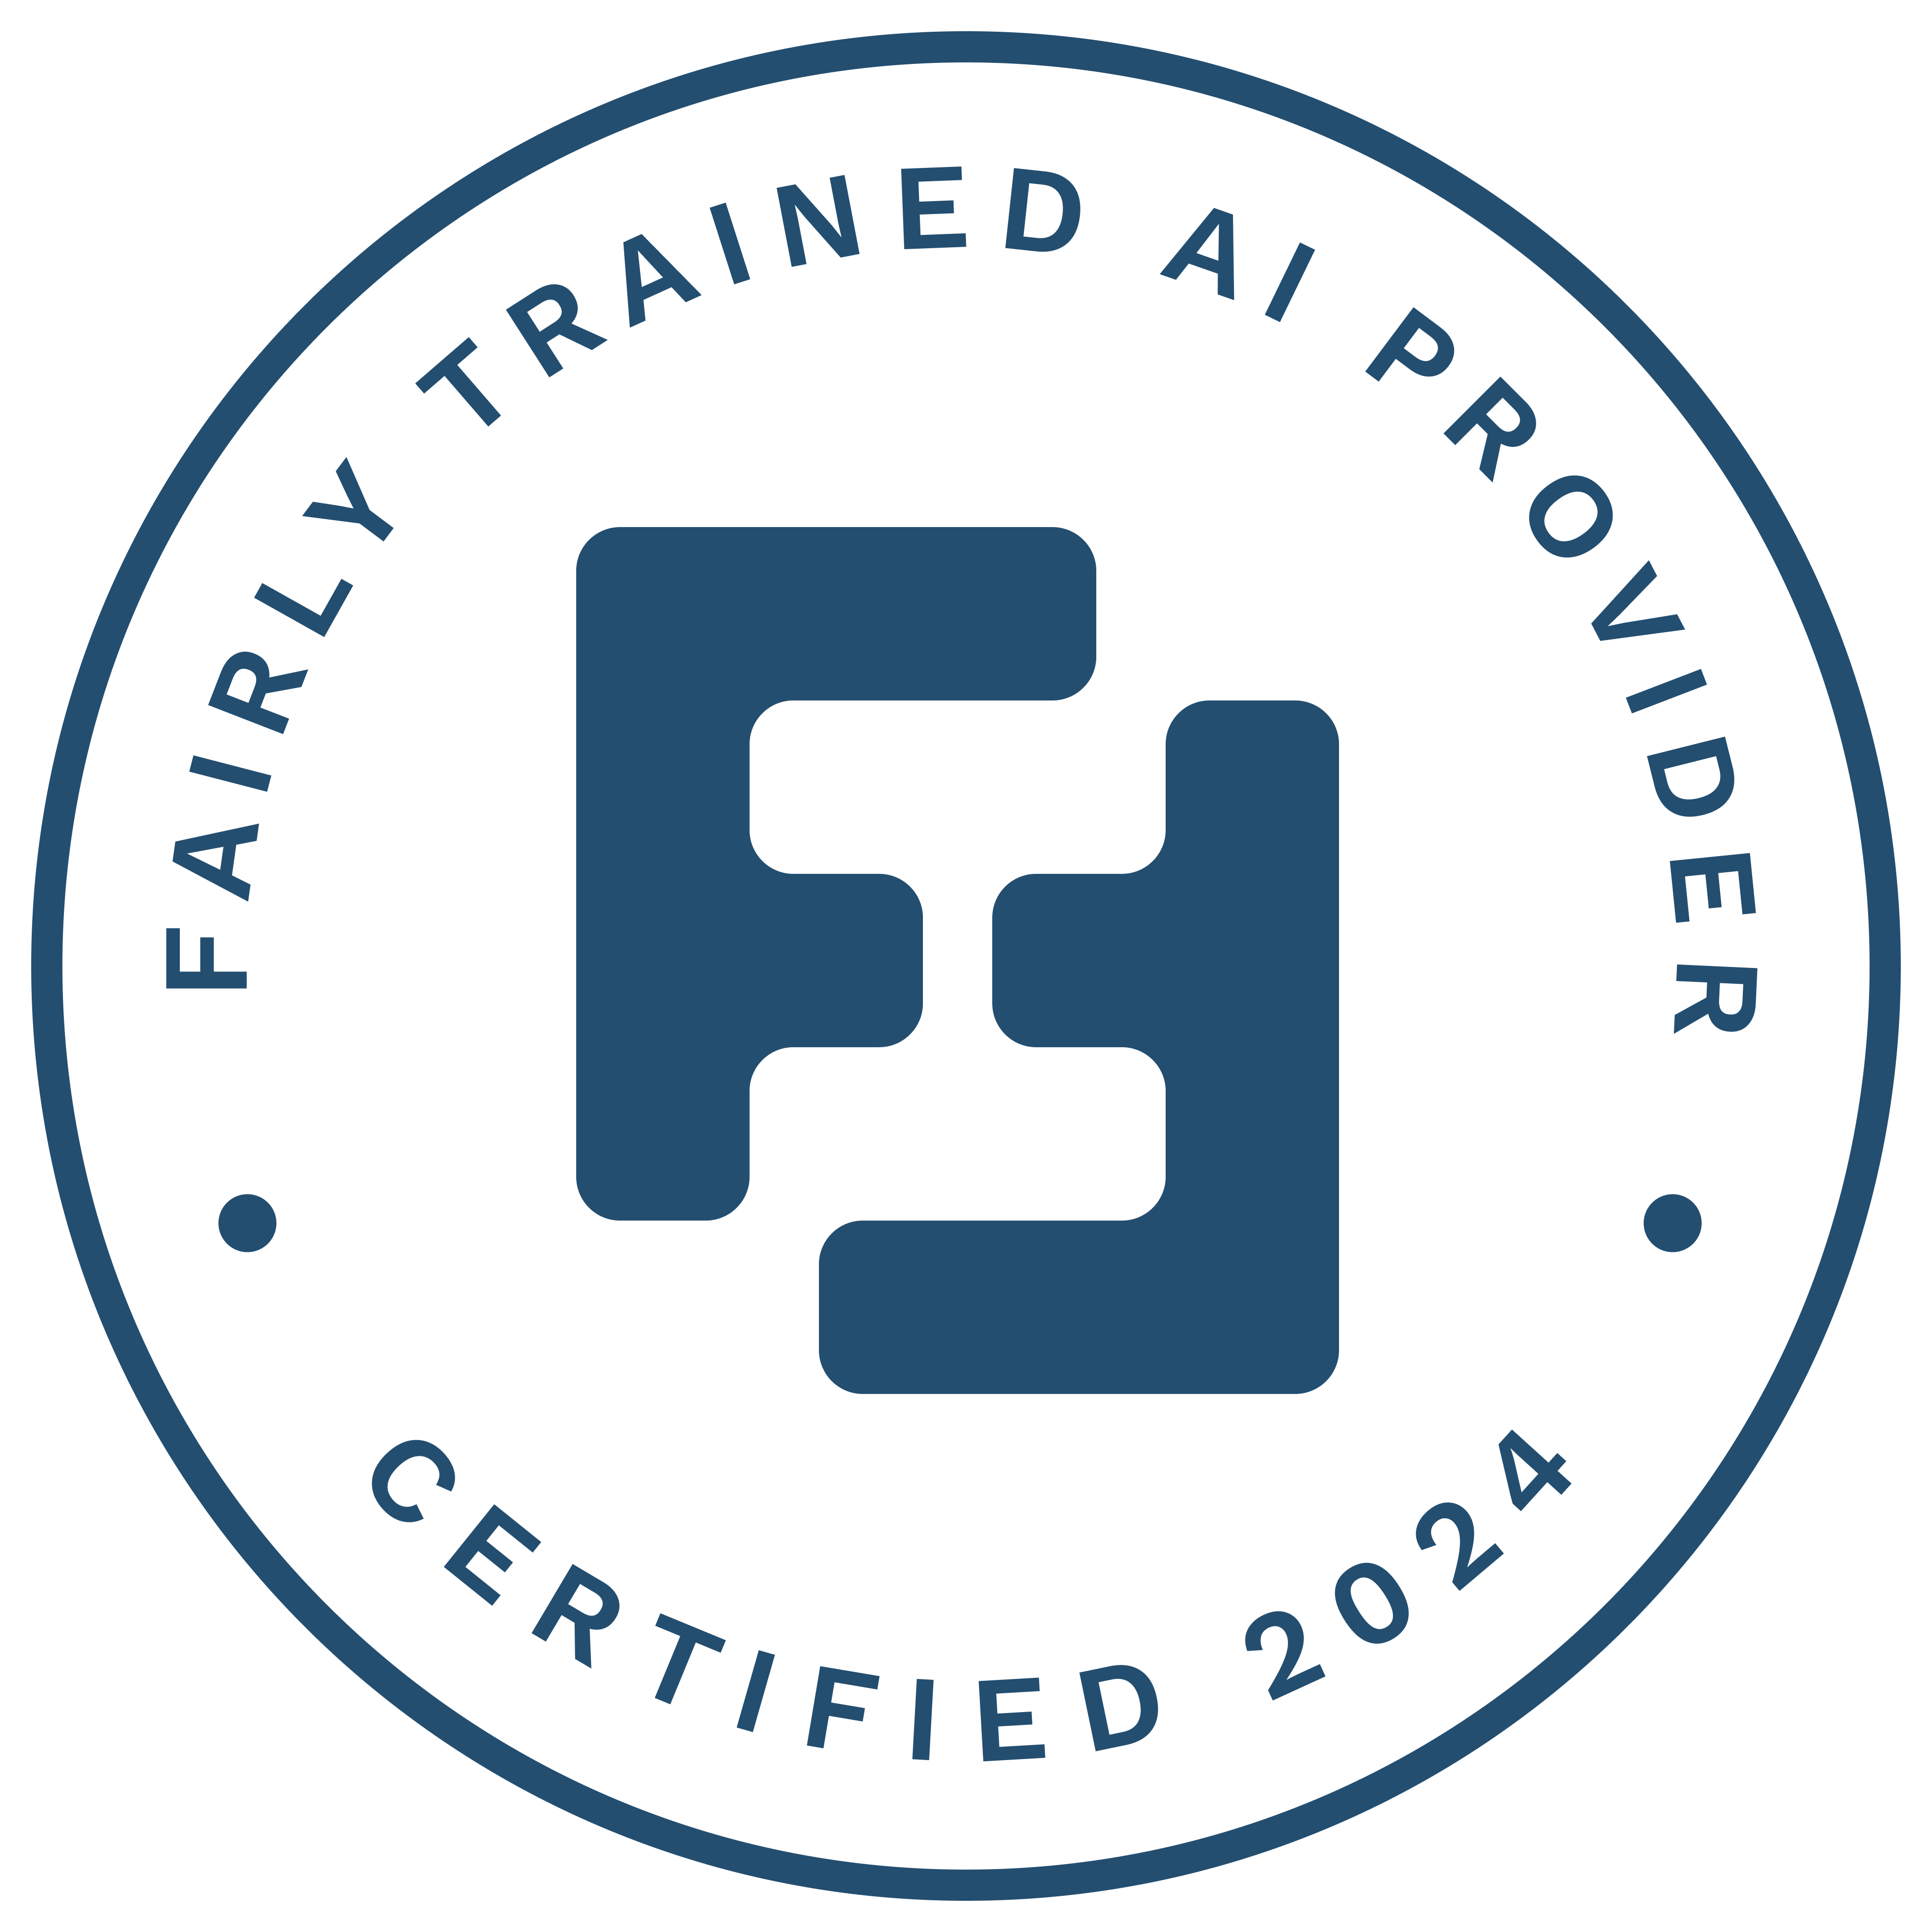 Fairly Trained L Certification